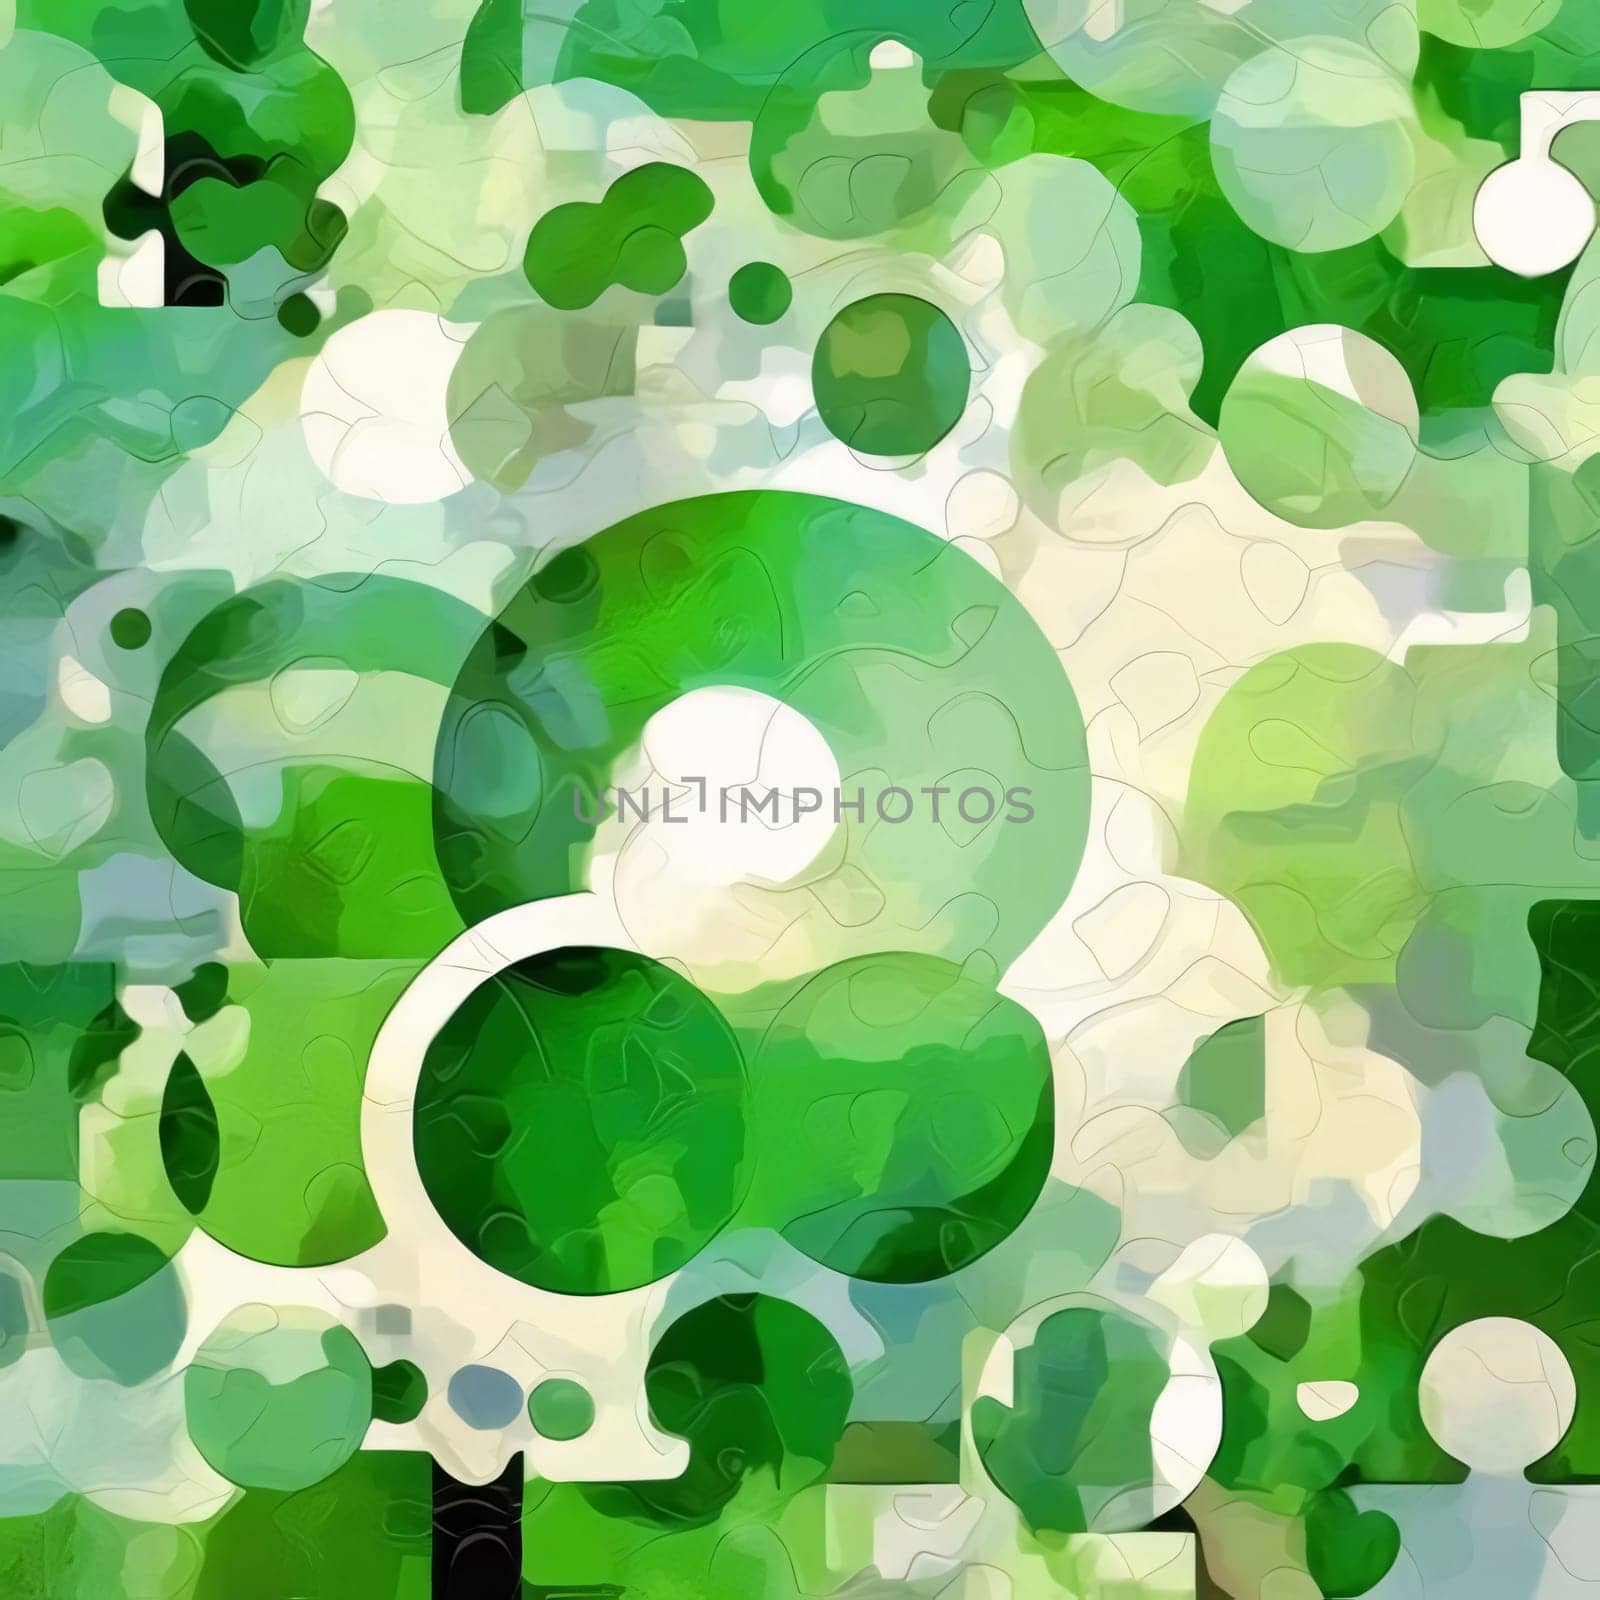 Abstract background design: abstract green background with spots and splashes of watercolor paint